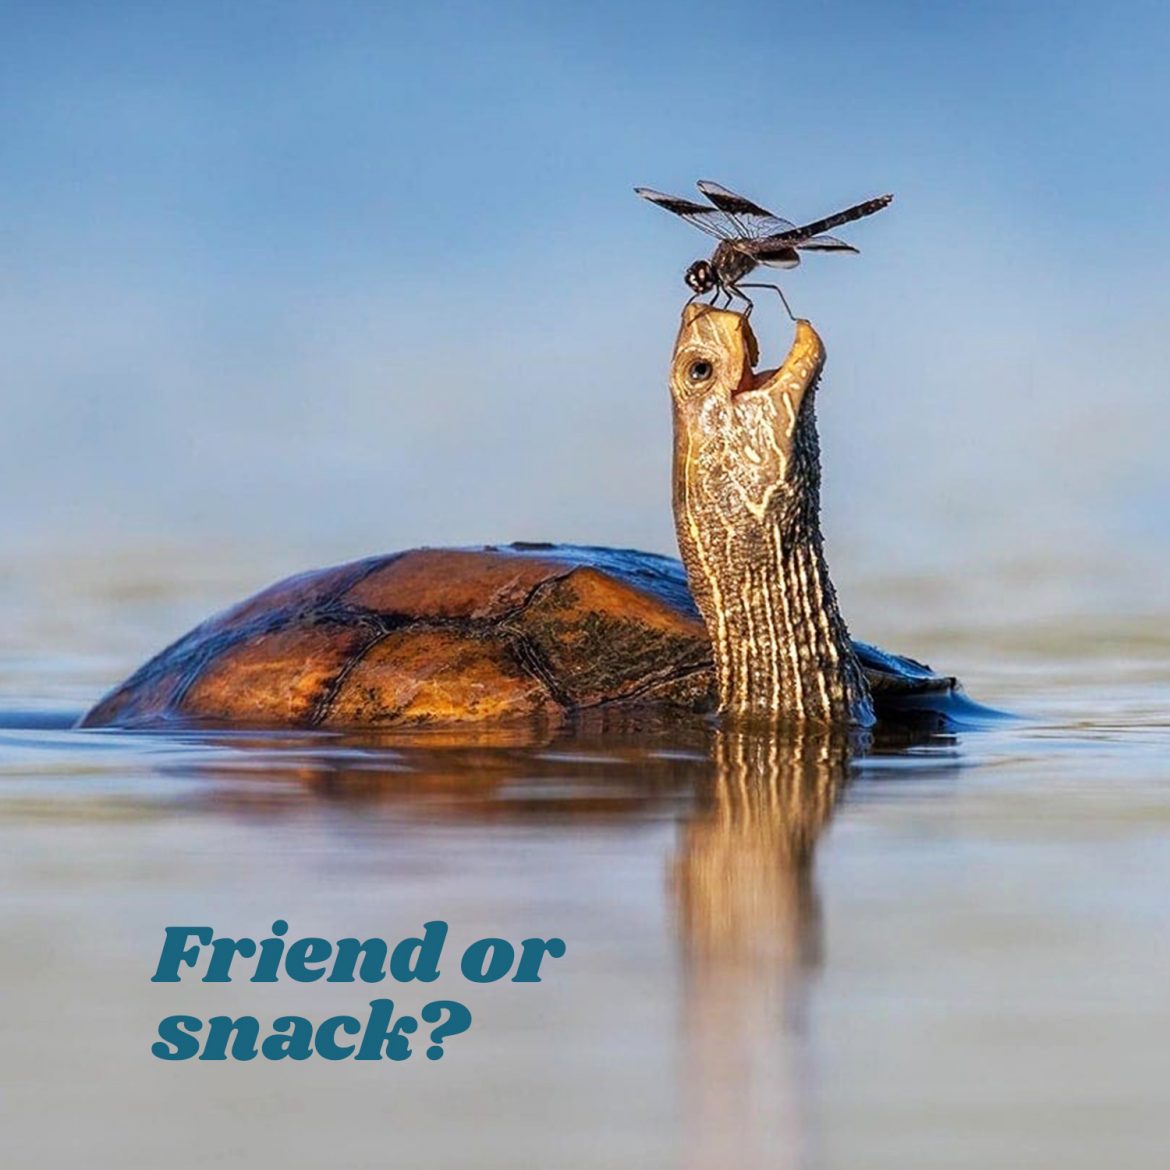 Friend or snack?